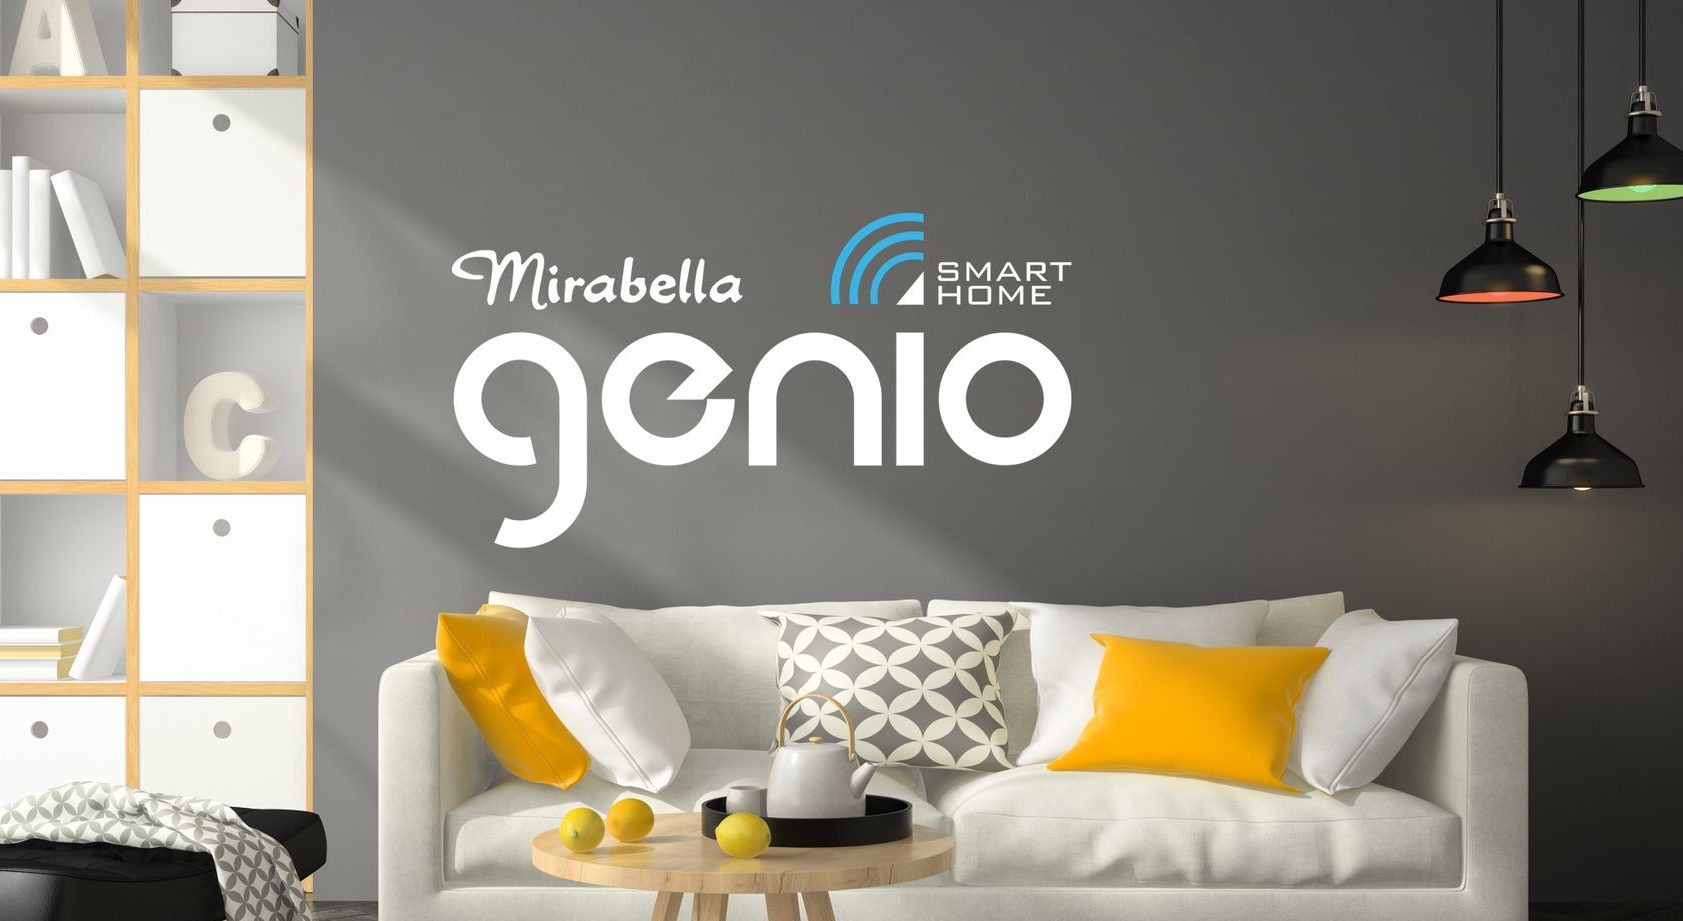 Mirabella Genio smart switches are just $29 from K-Mart, and awesome